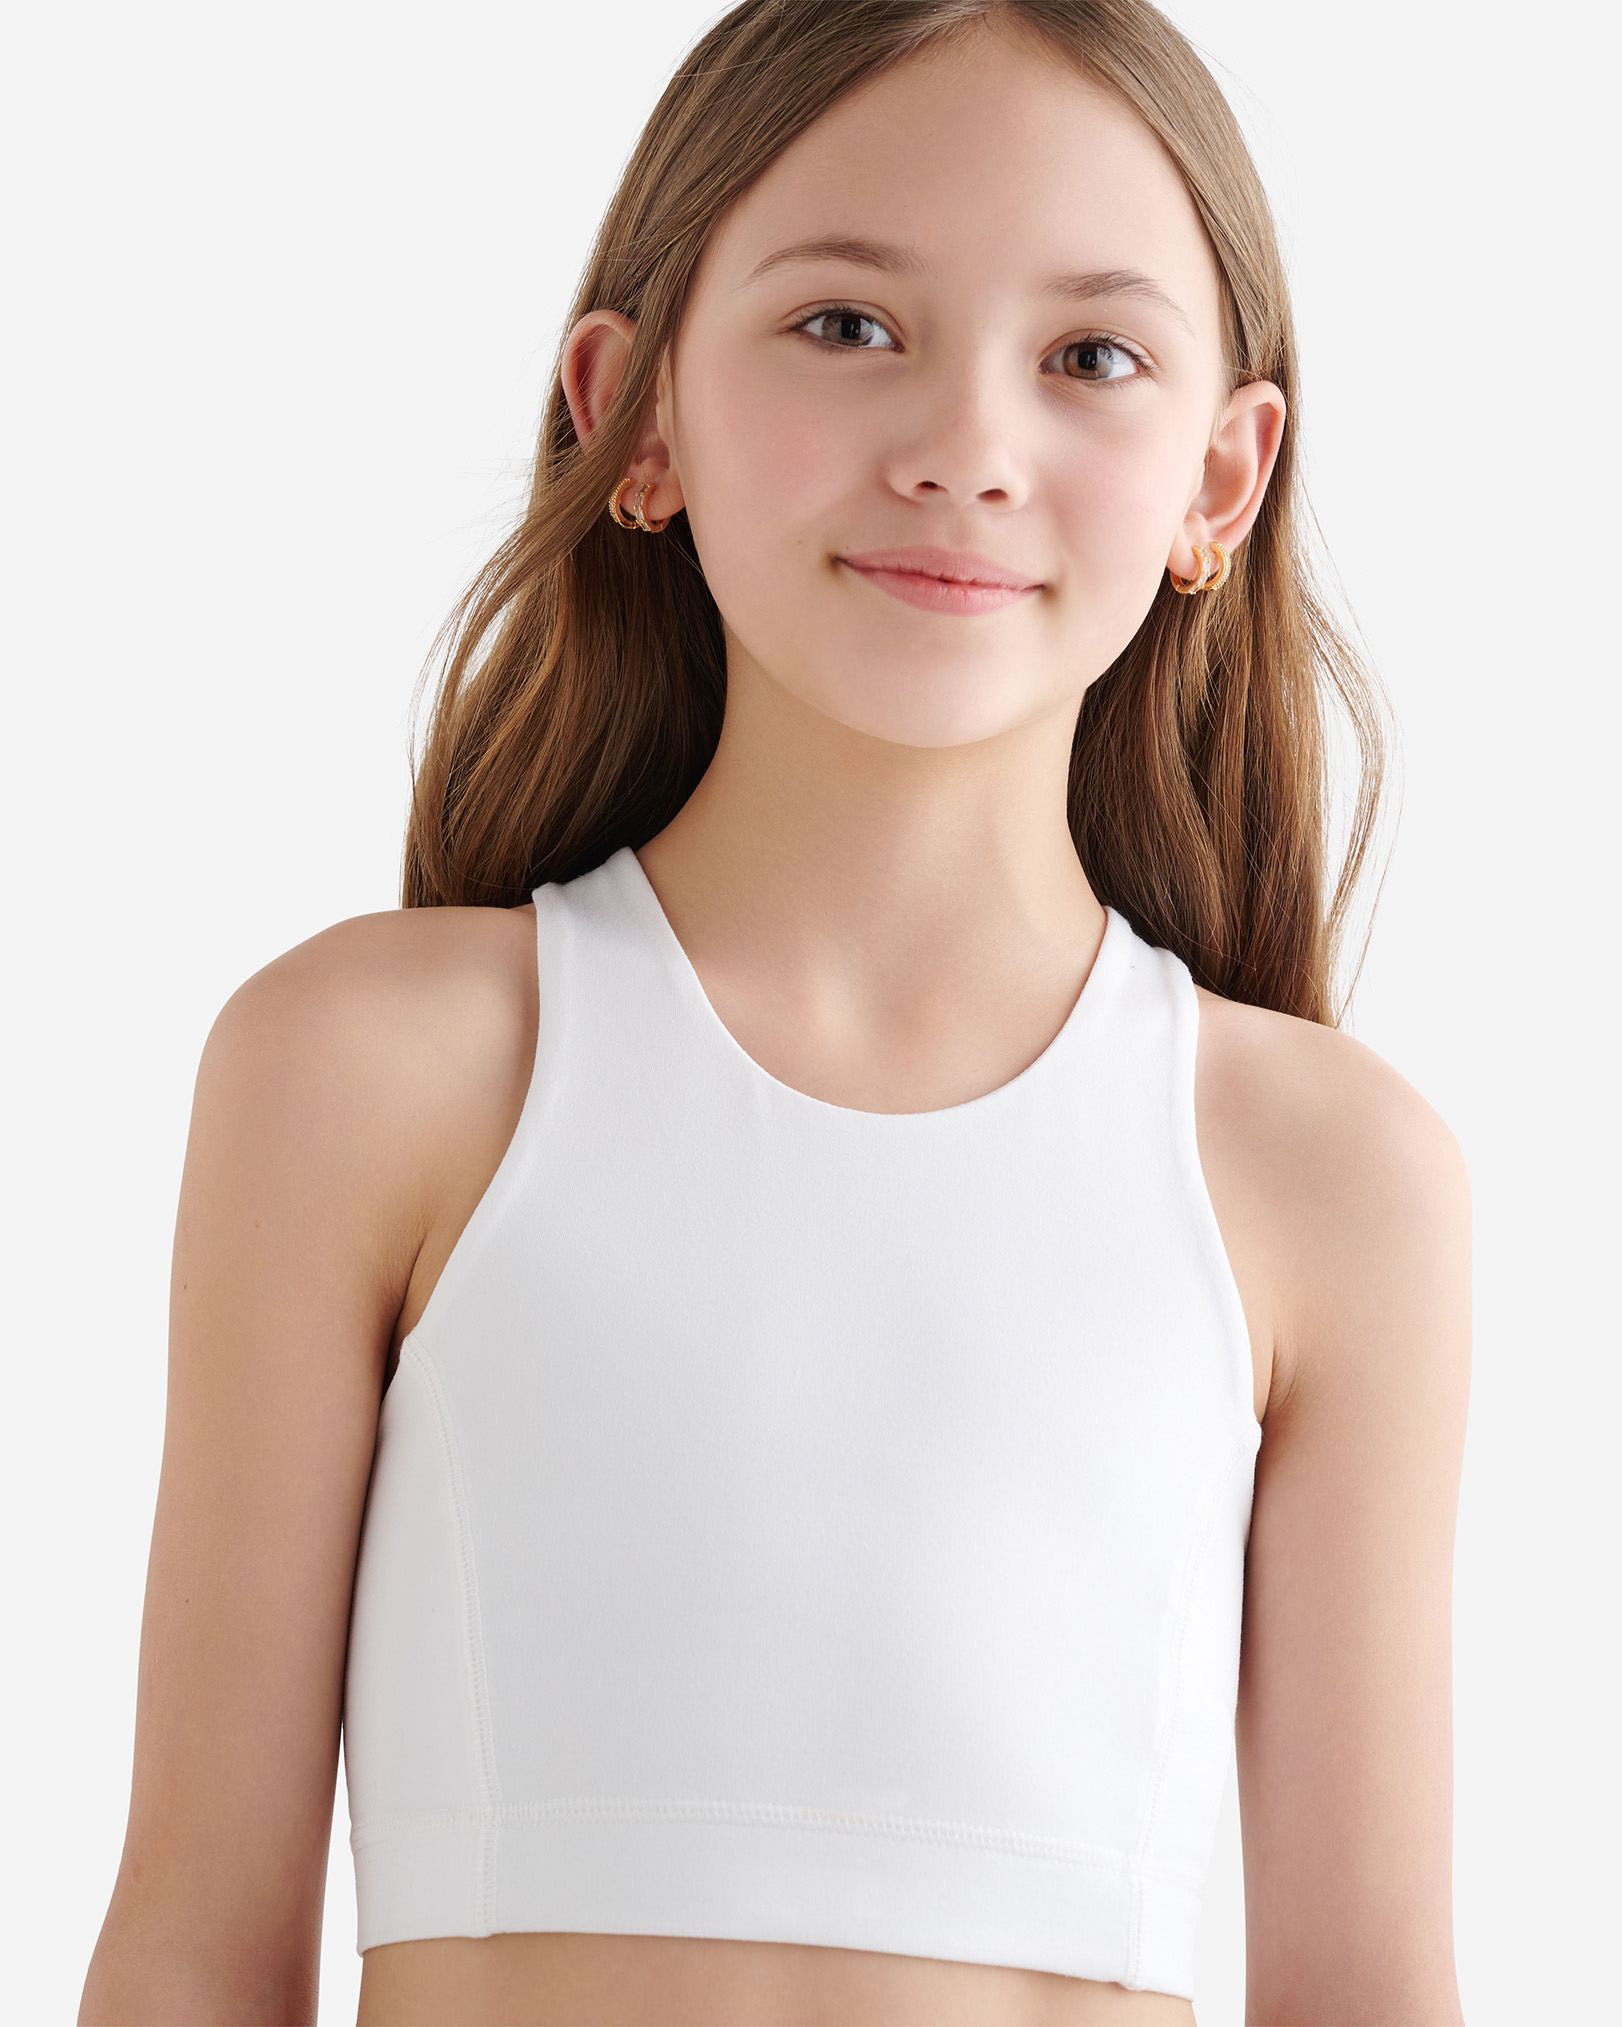 Roots Girl's Active Racerback Tank Top in White